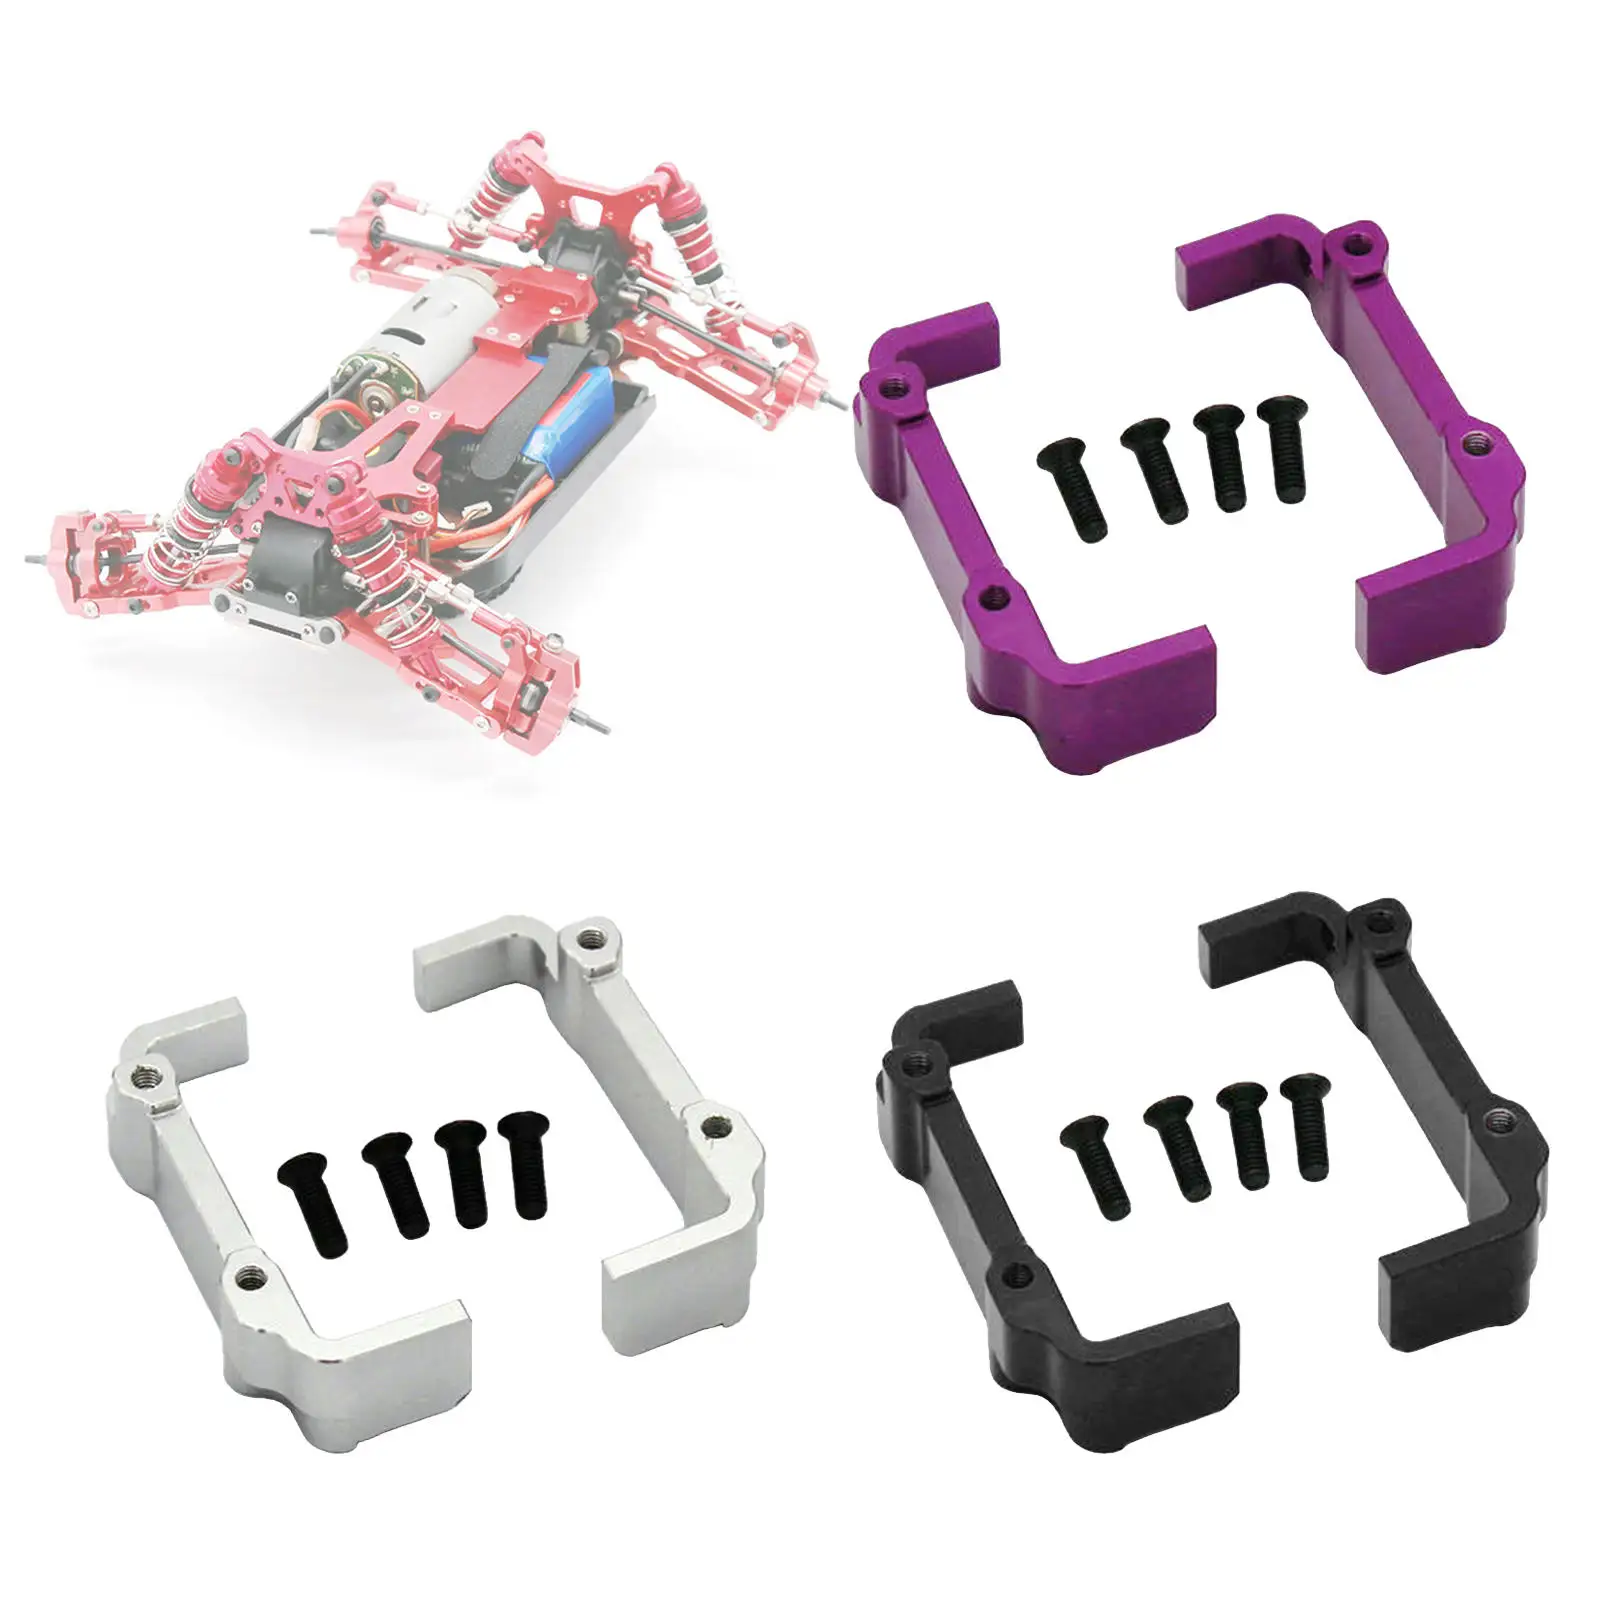 2 Pieces RC Car Battery Holder for Wltoys 144001 124017 1:12 RC Car Replaces Upgrade Parts